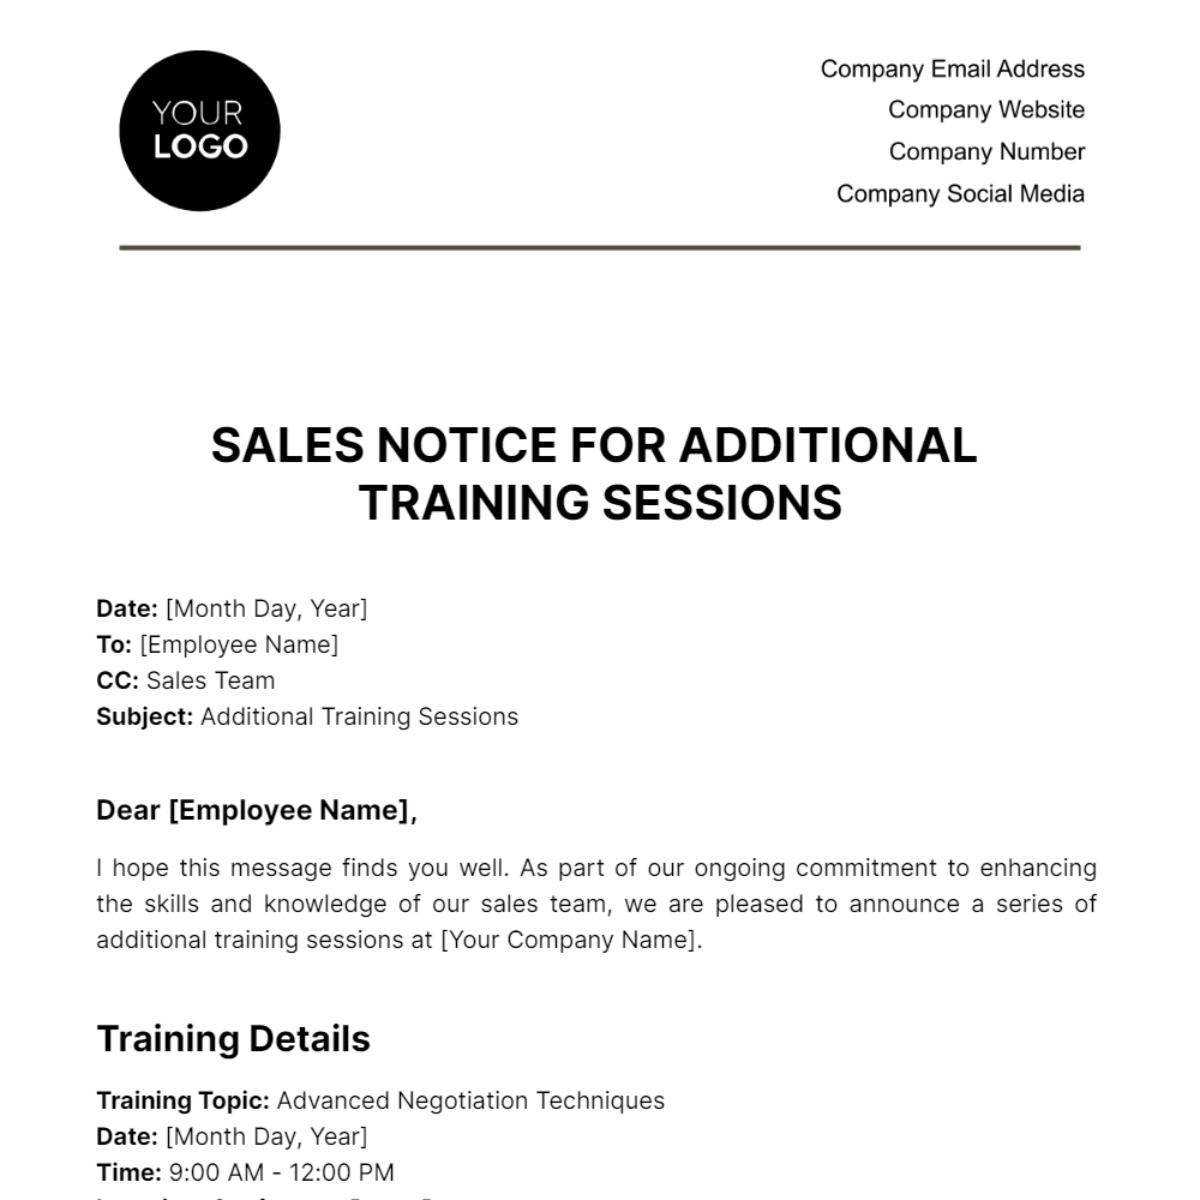 Free Sales Notice for Additional Training Sessions Template